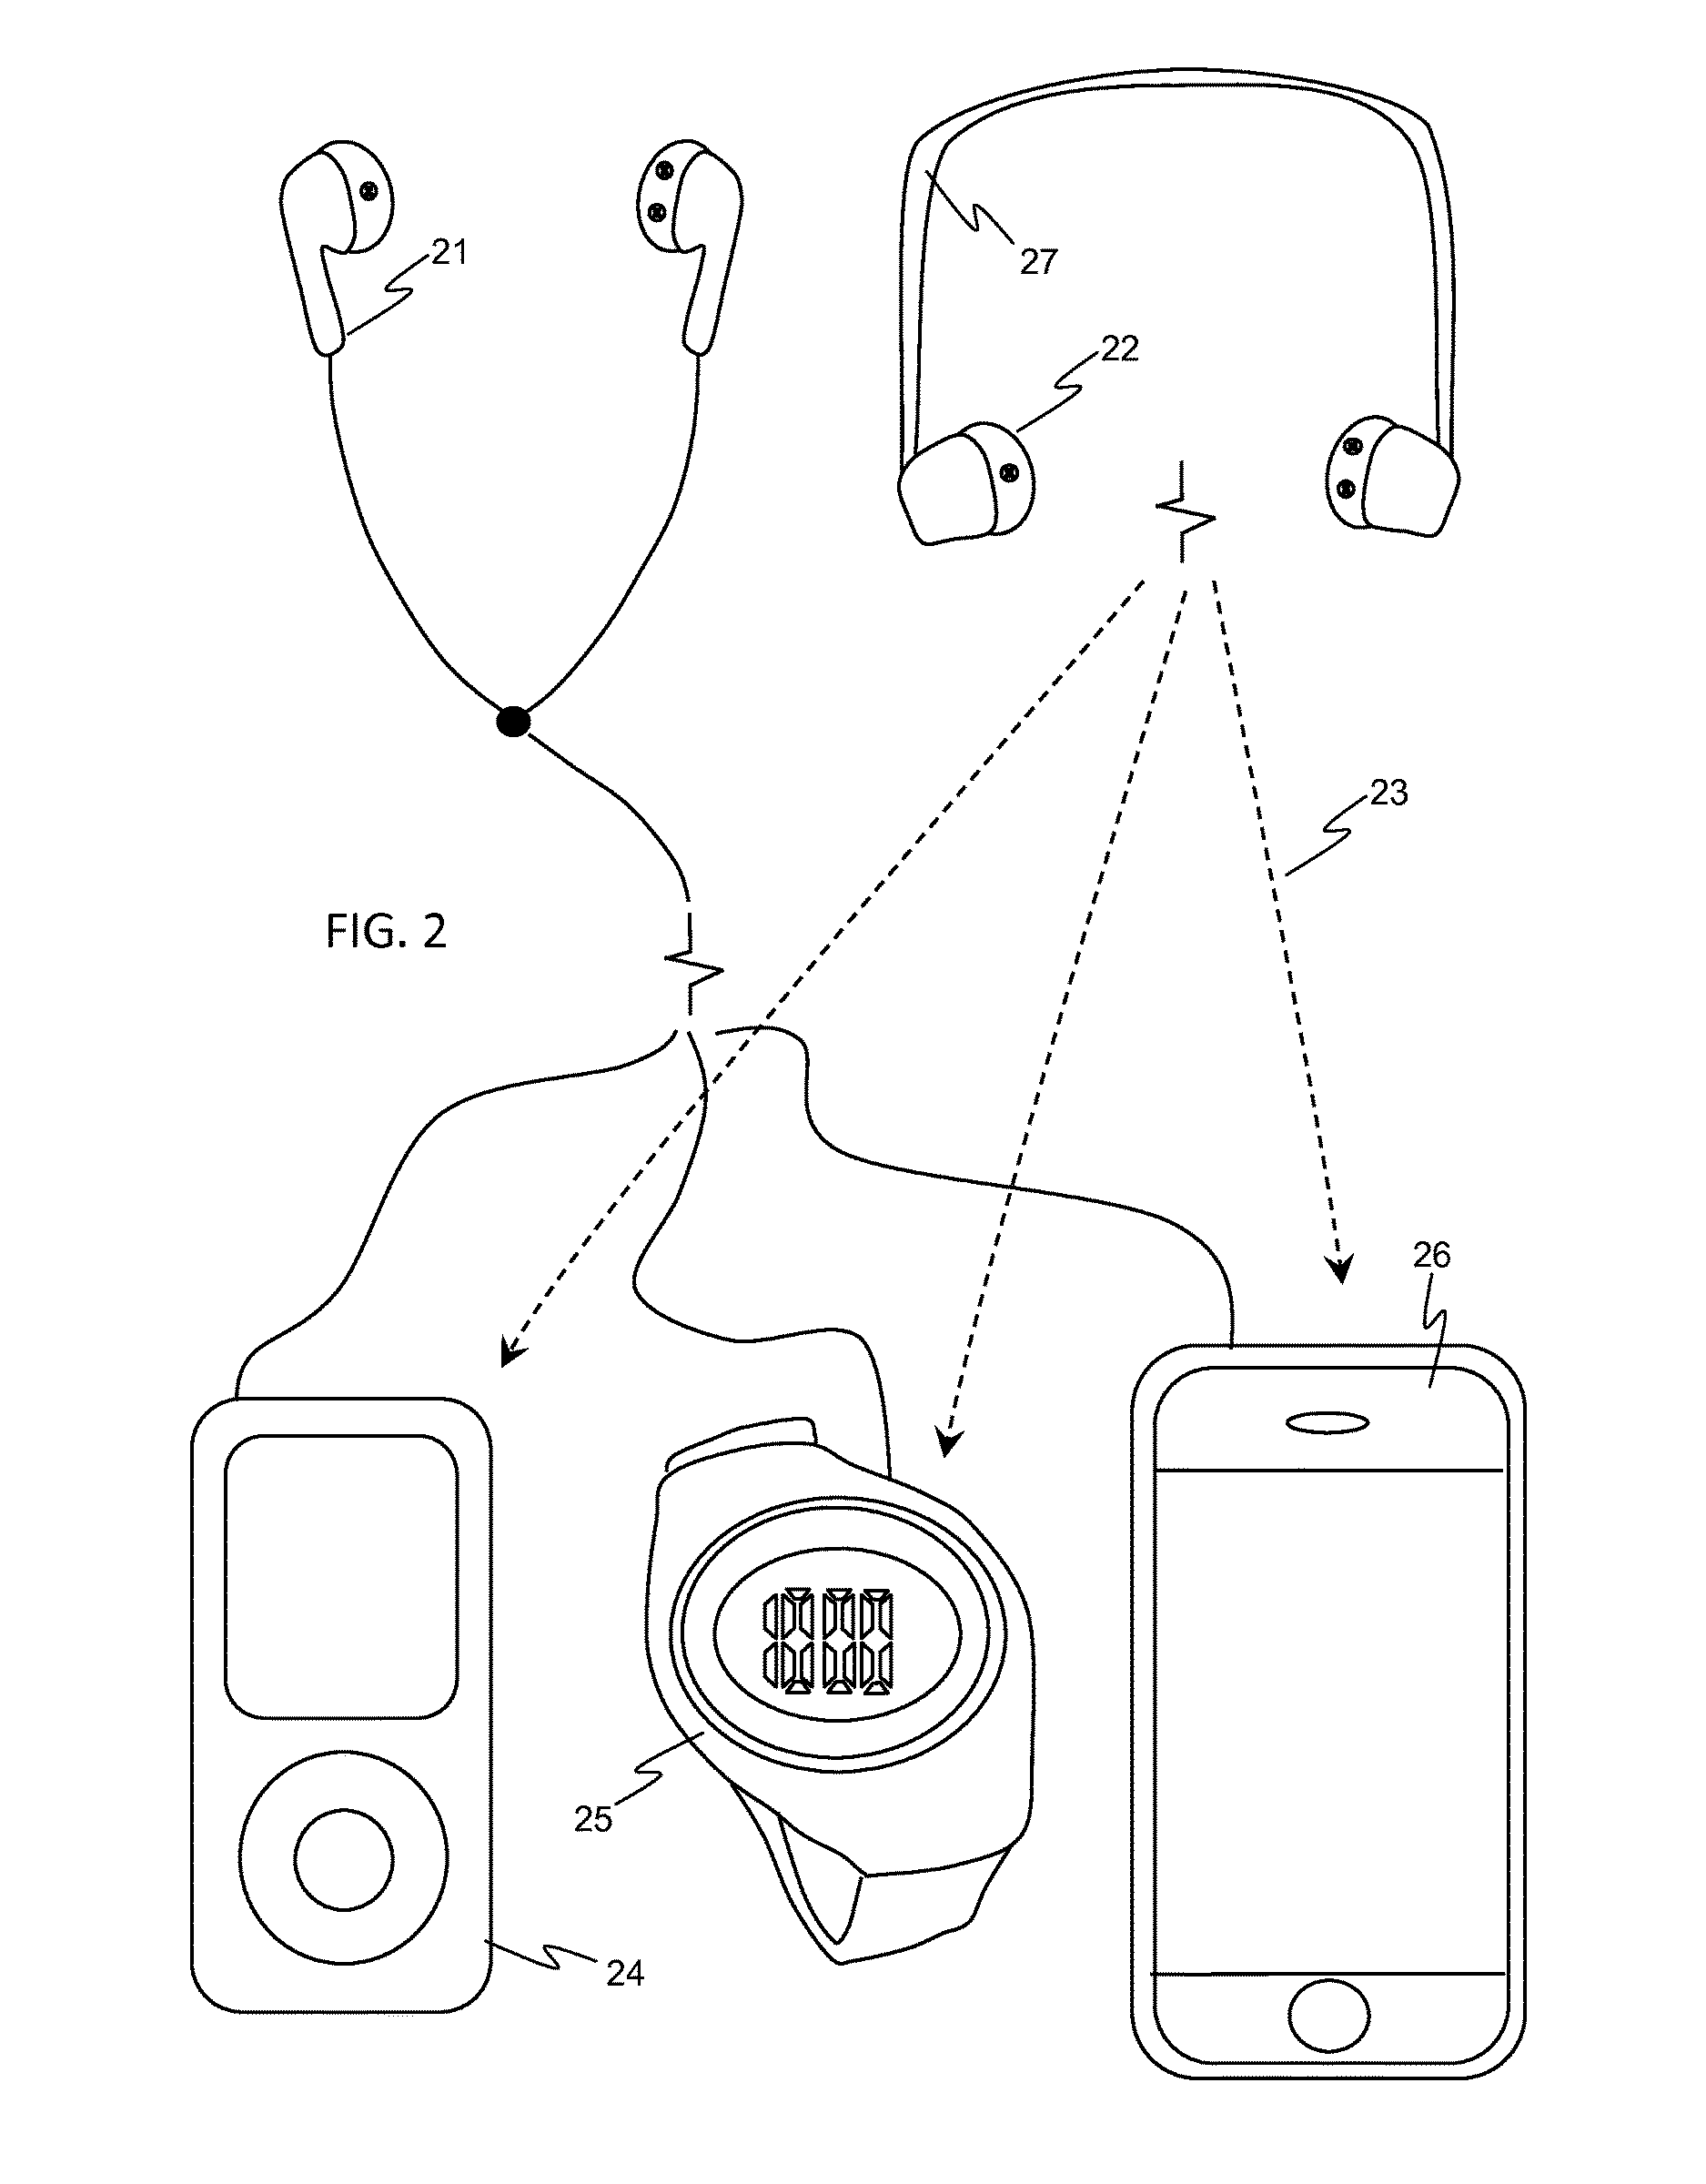 Head-mounted physiological signal monitoring system, devices and methods